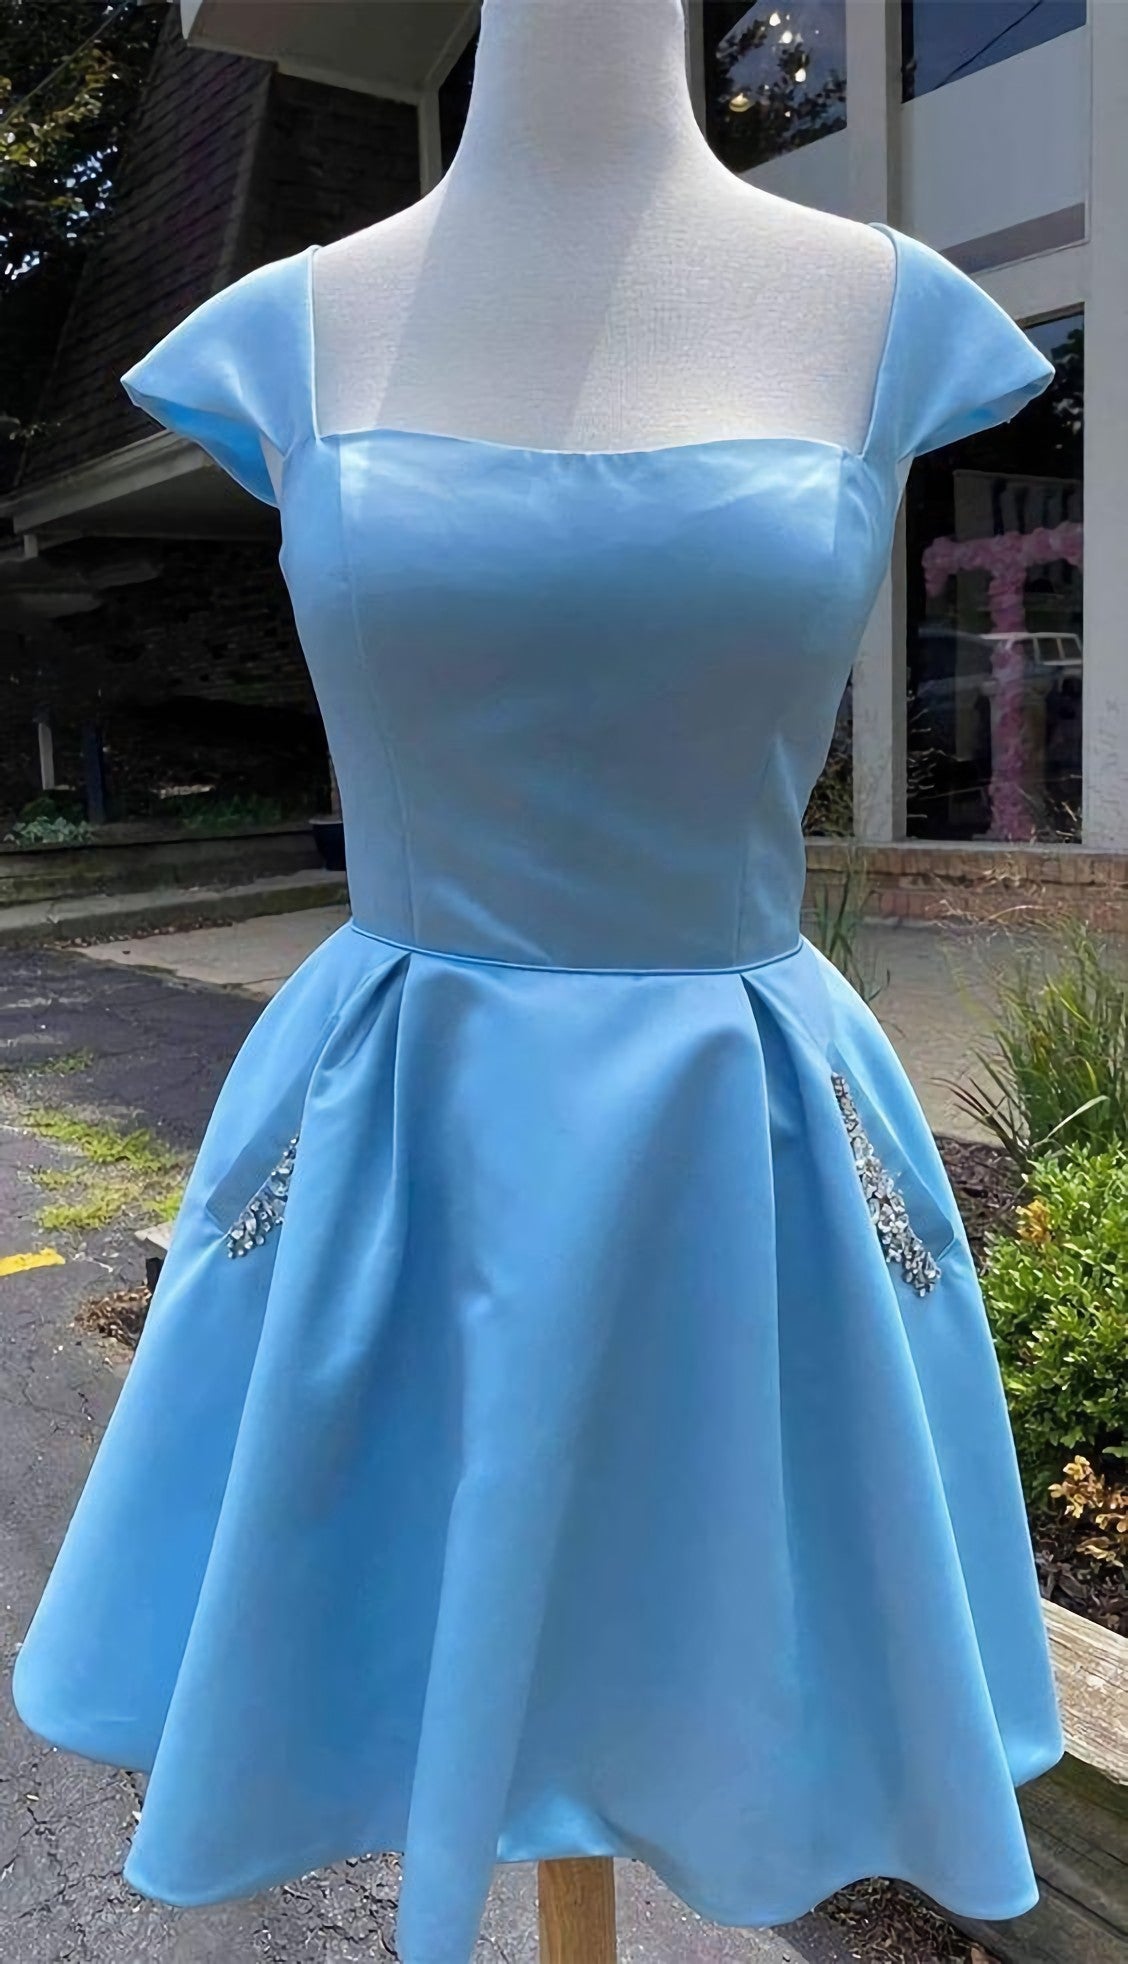 Prom Dresses Sweetheart, Cap Sleeves Light Blue Satin Short Homecoming Dress, With Beaded Bodice